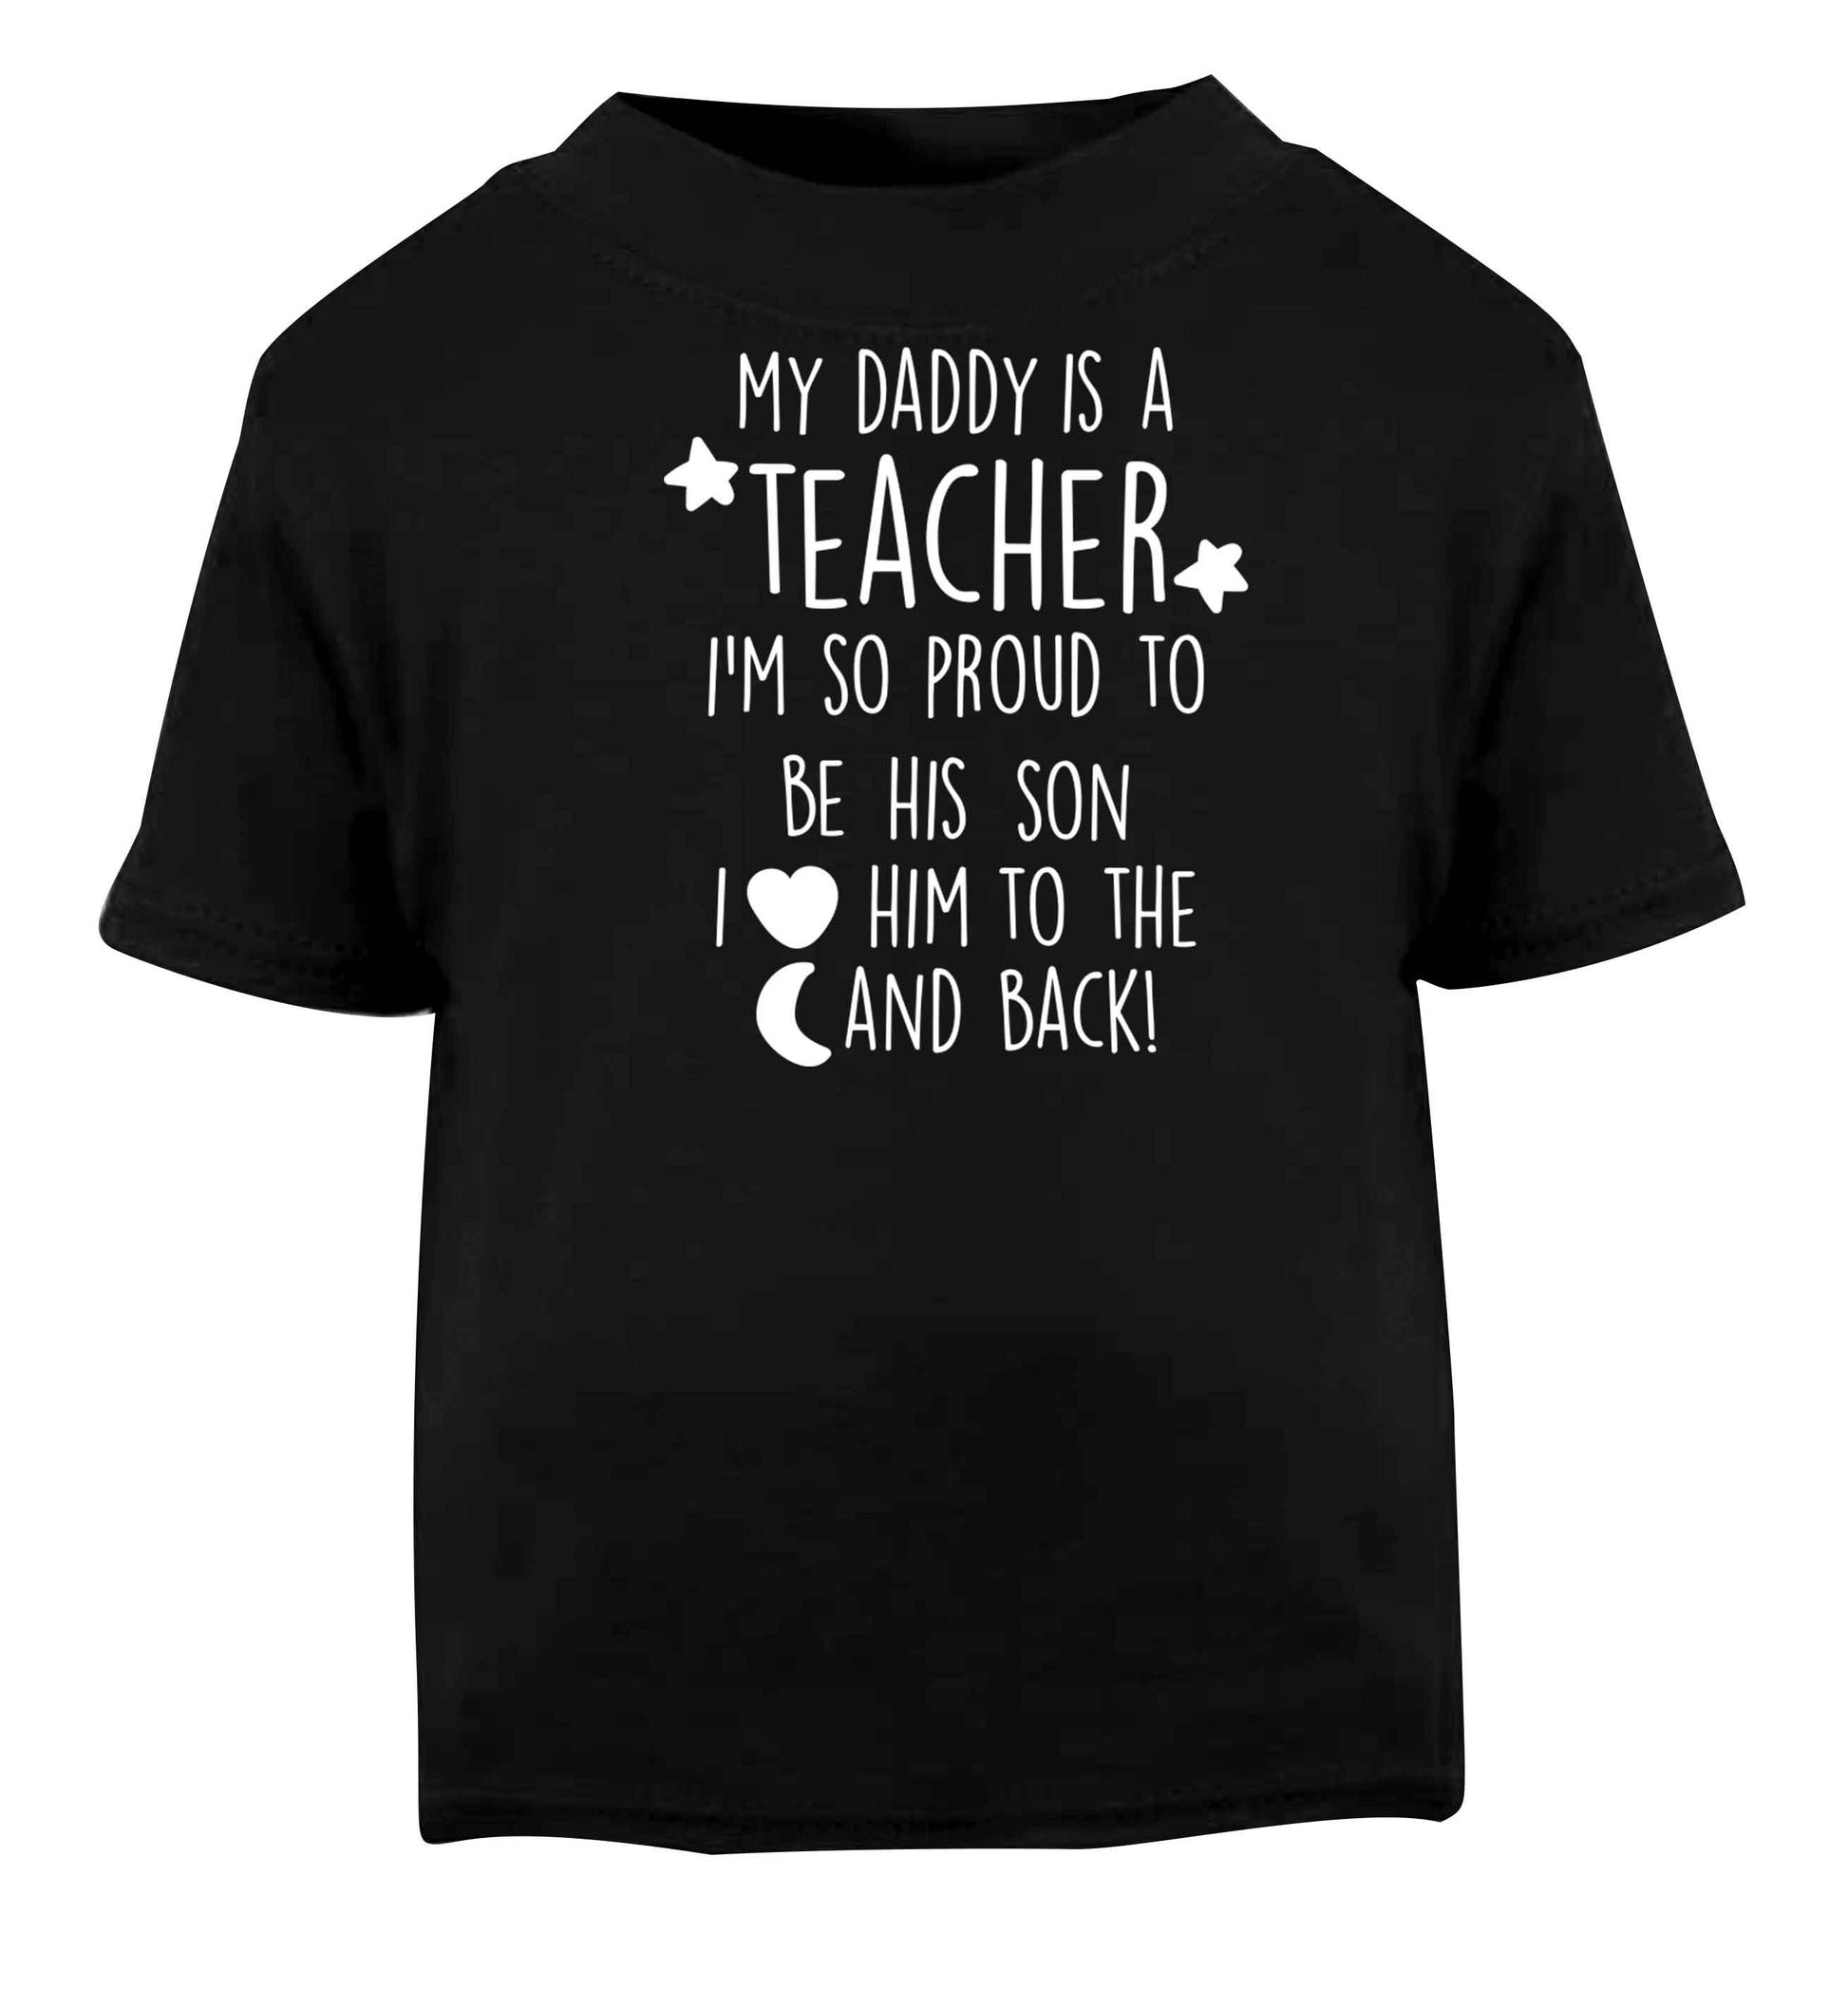 My daddy is a teacher I'm so proud to be his son I love her to the moon and back Black baby toddler Tshirt 2 years